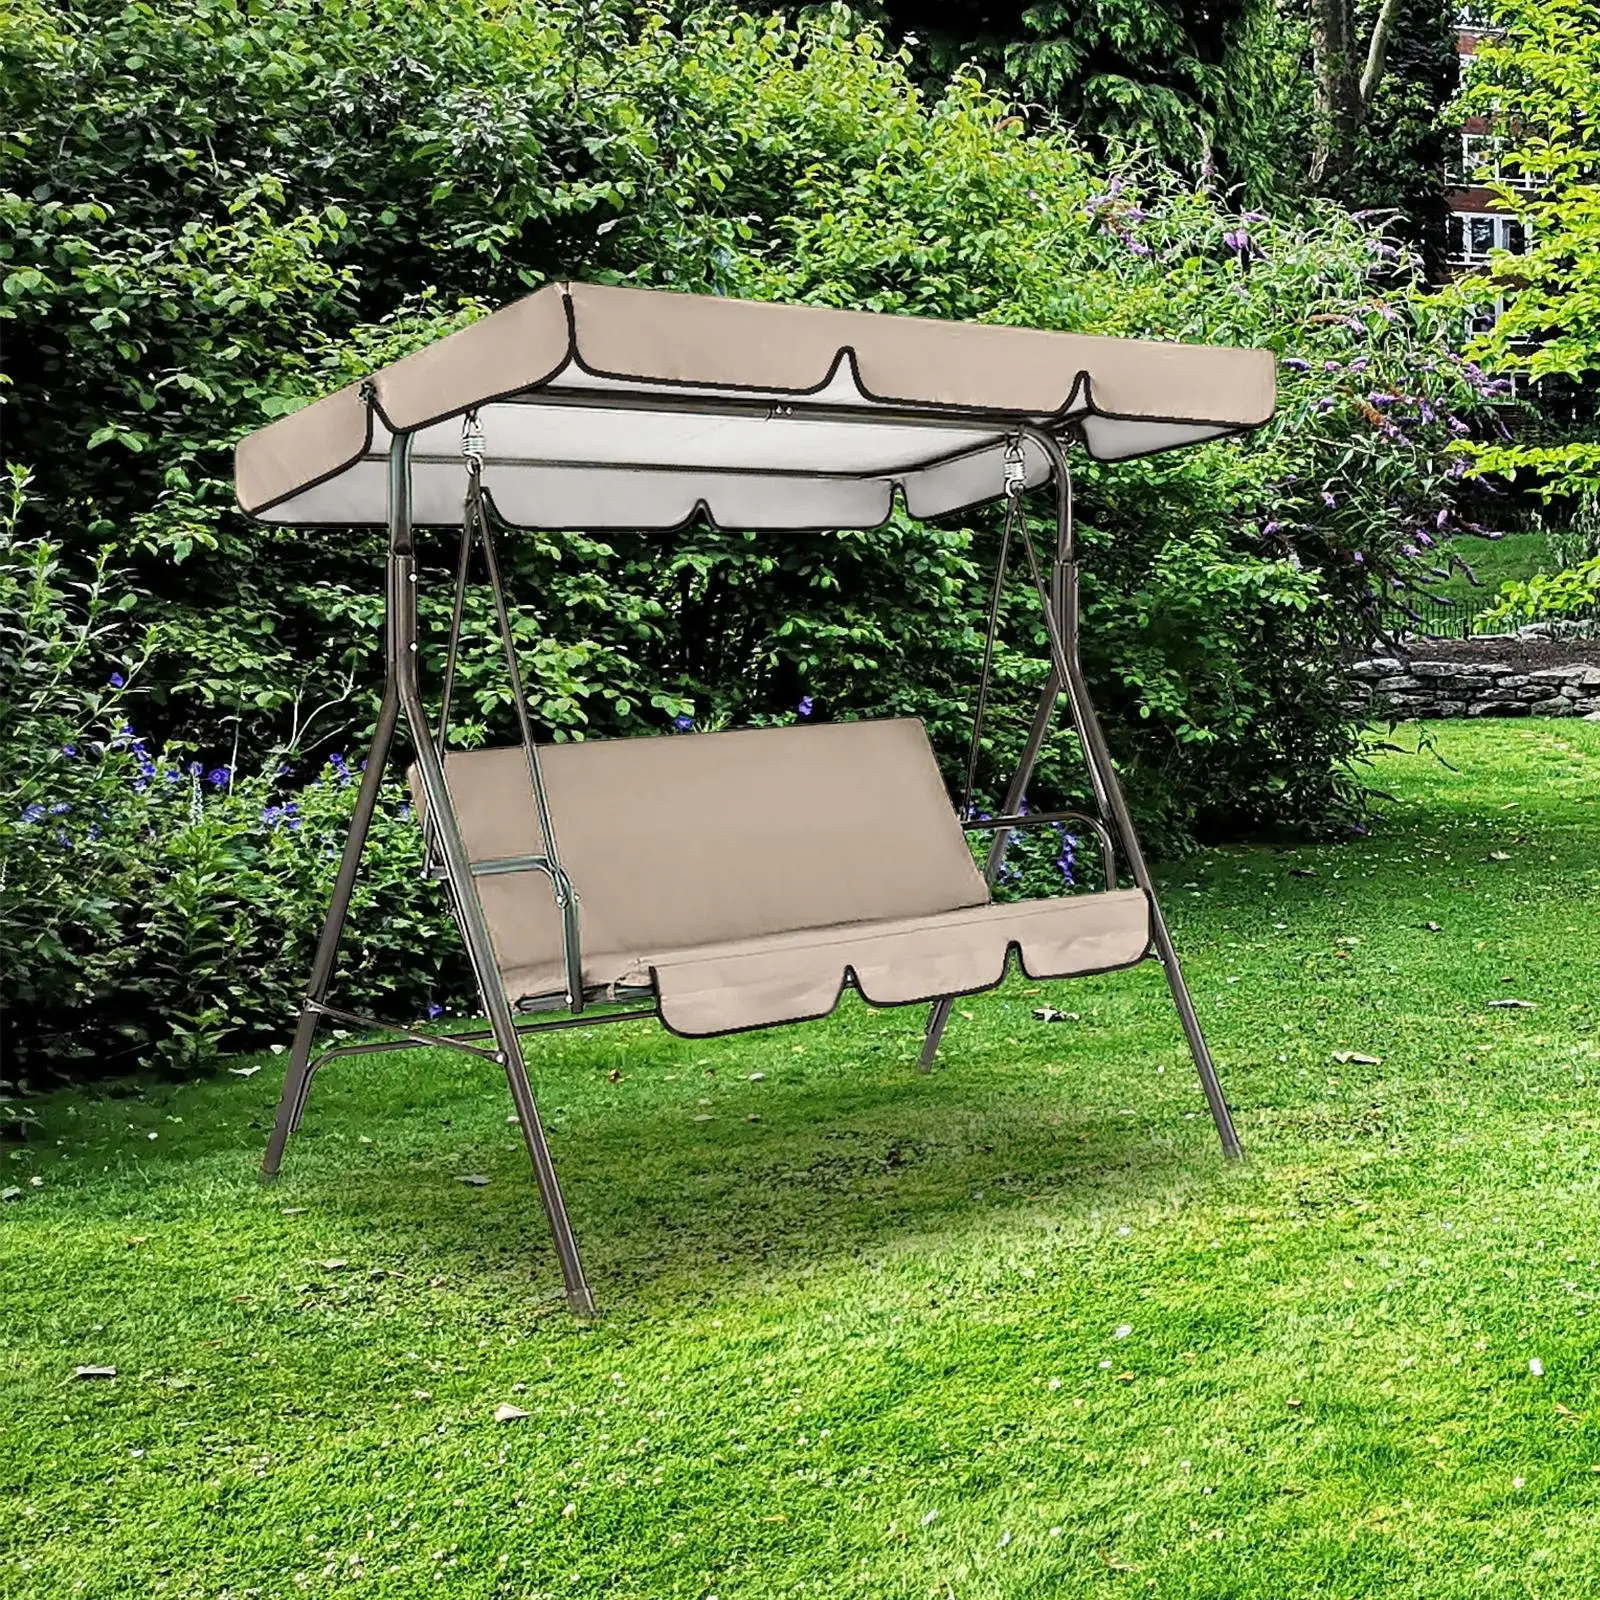 Patio Swing Canopy Replacement Rain Cover Windproof Dustproof Garden Swing Chair Cover for Swing Furniture Porch Seat Patio